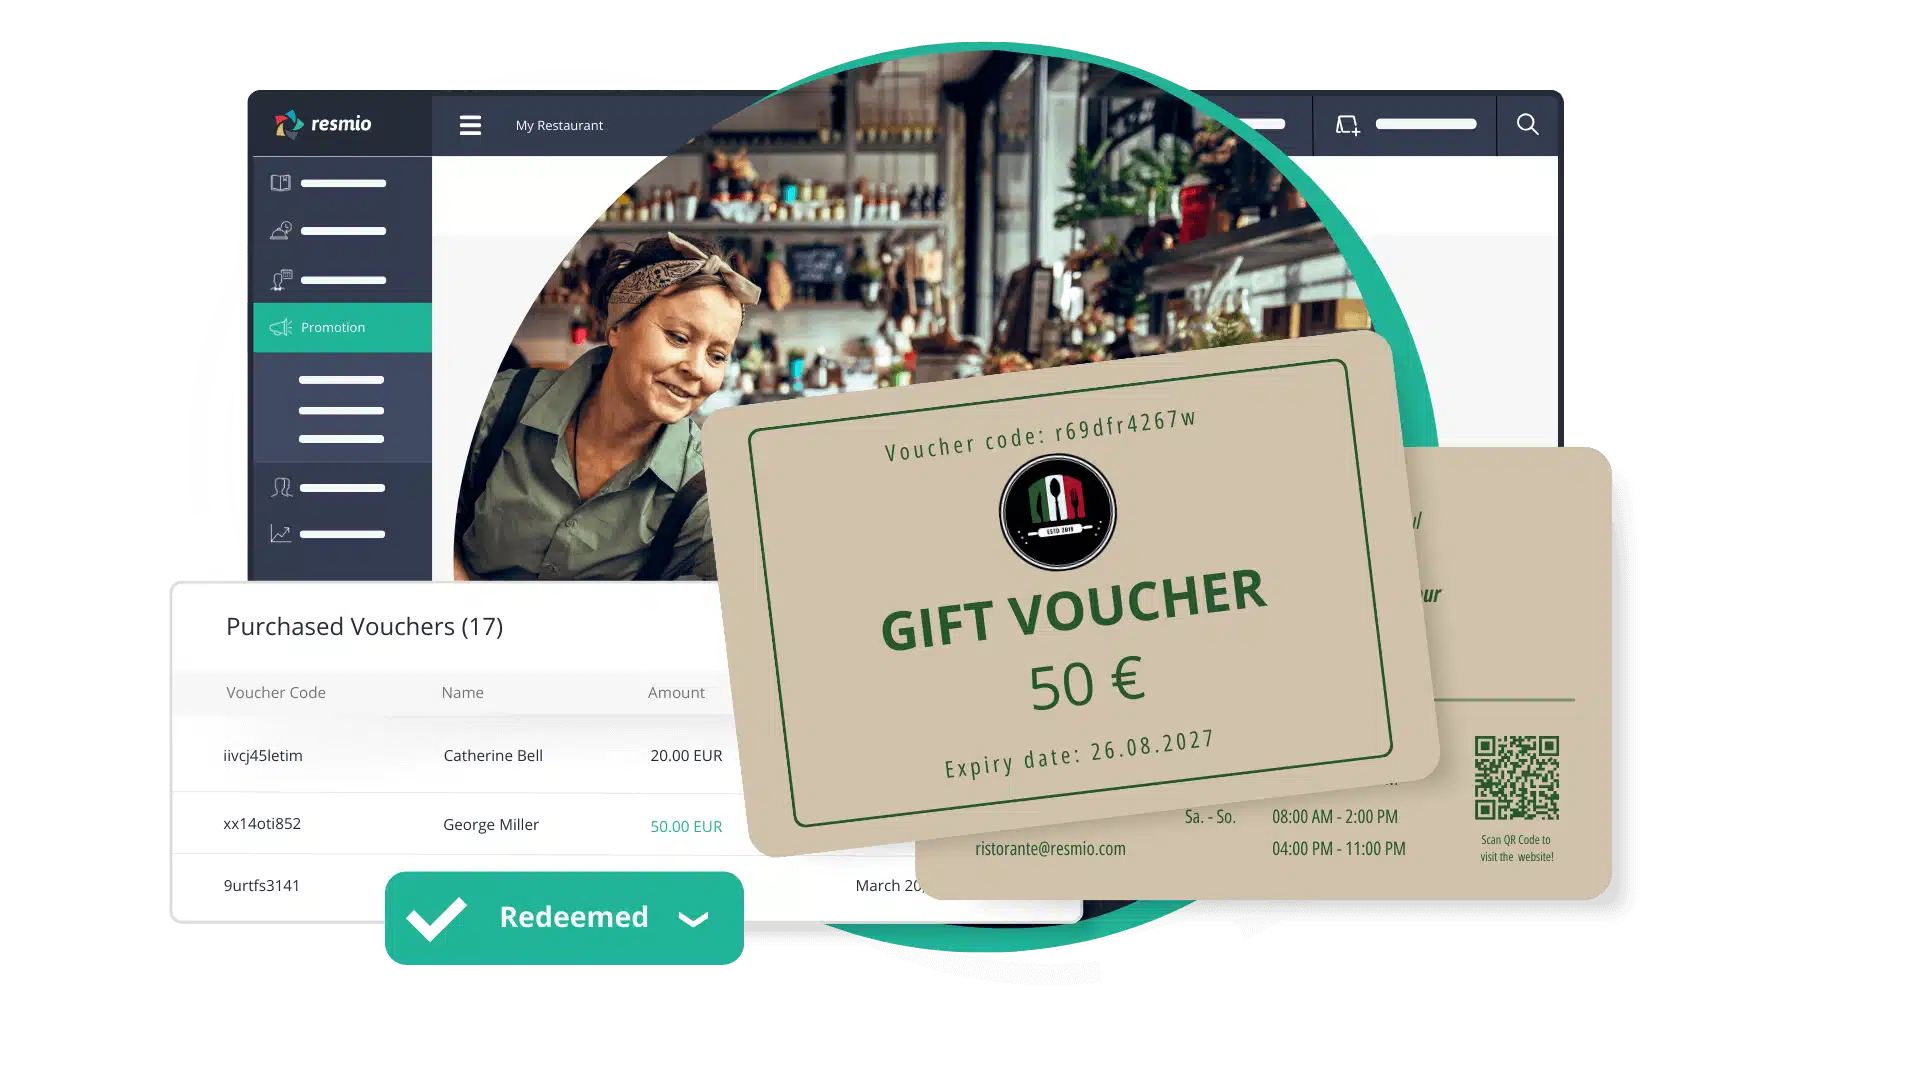 voucher coupon and online ticketing system for restaurants